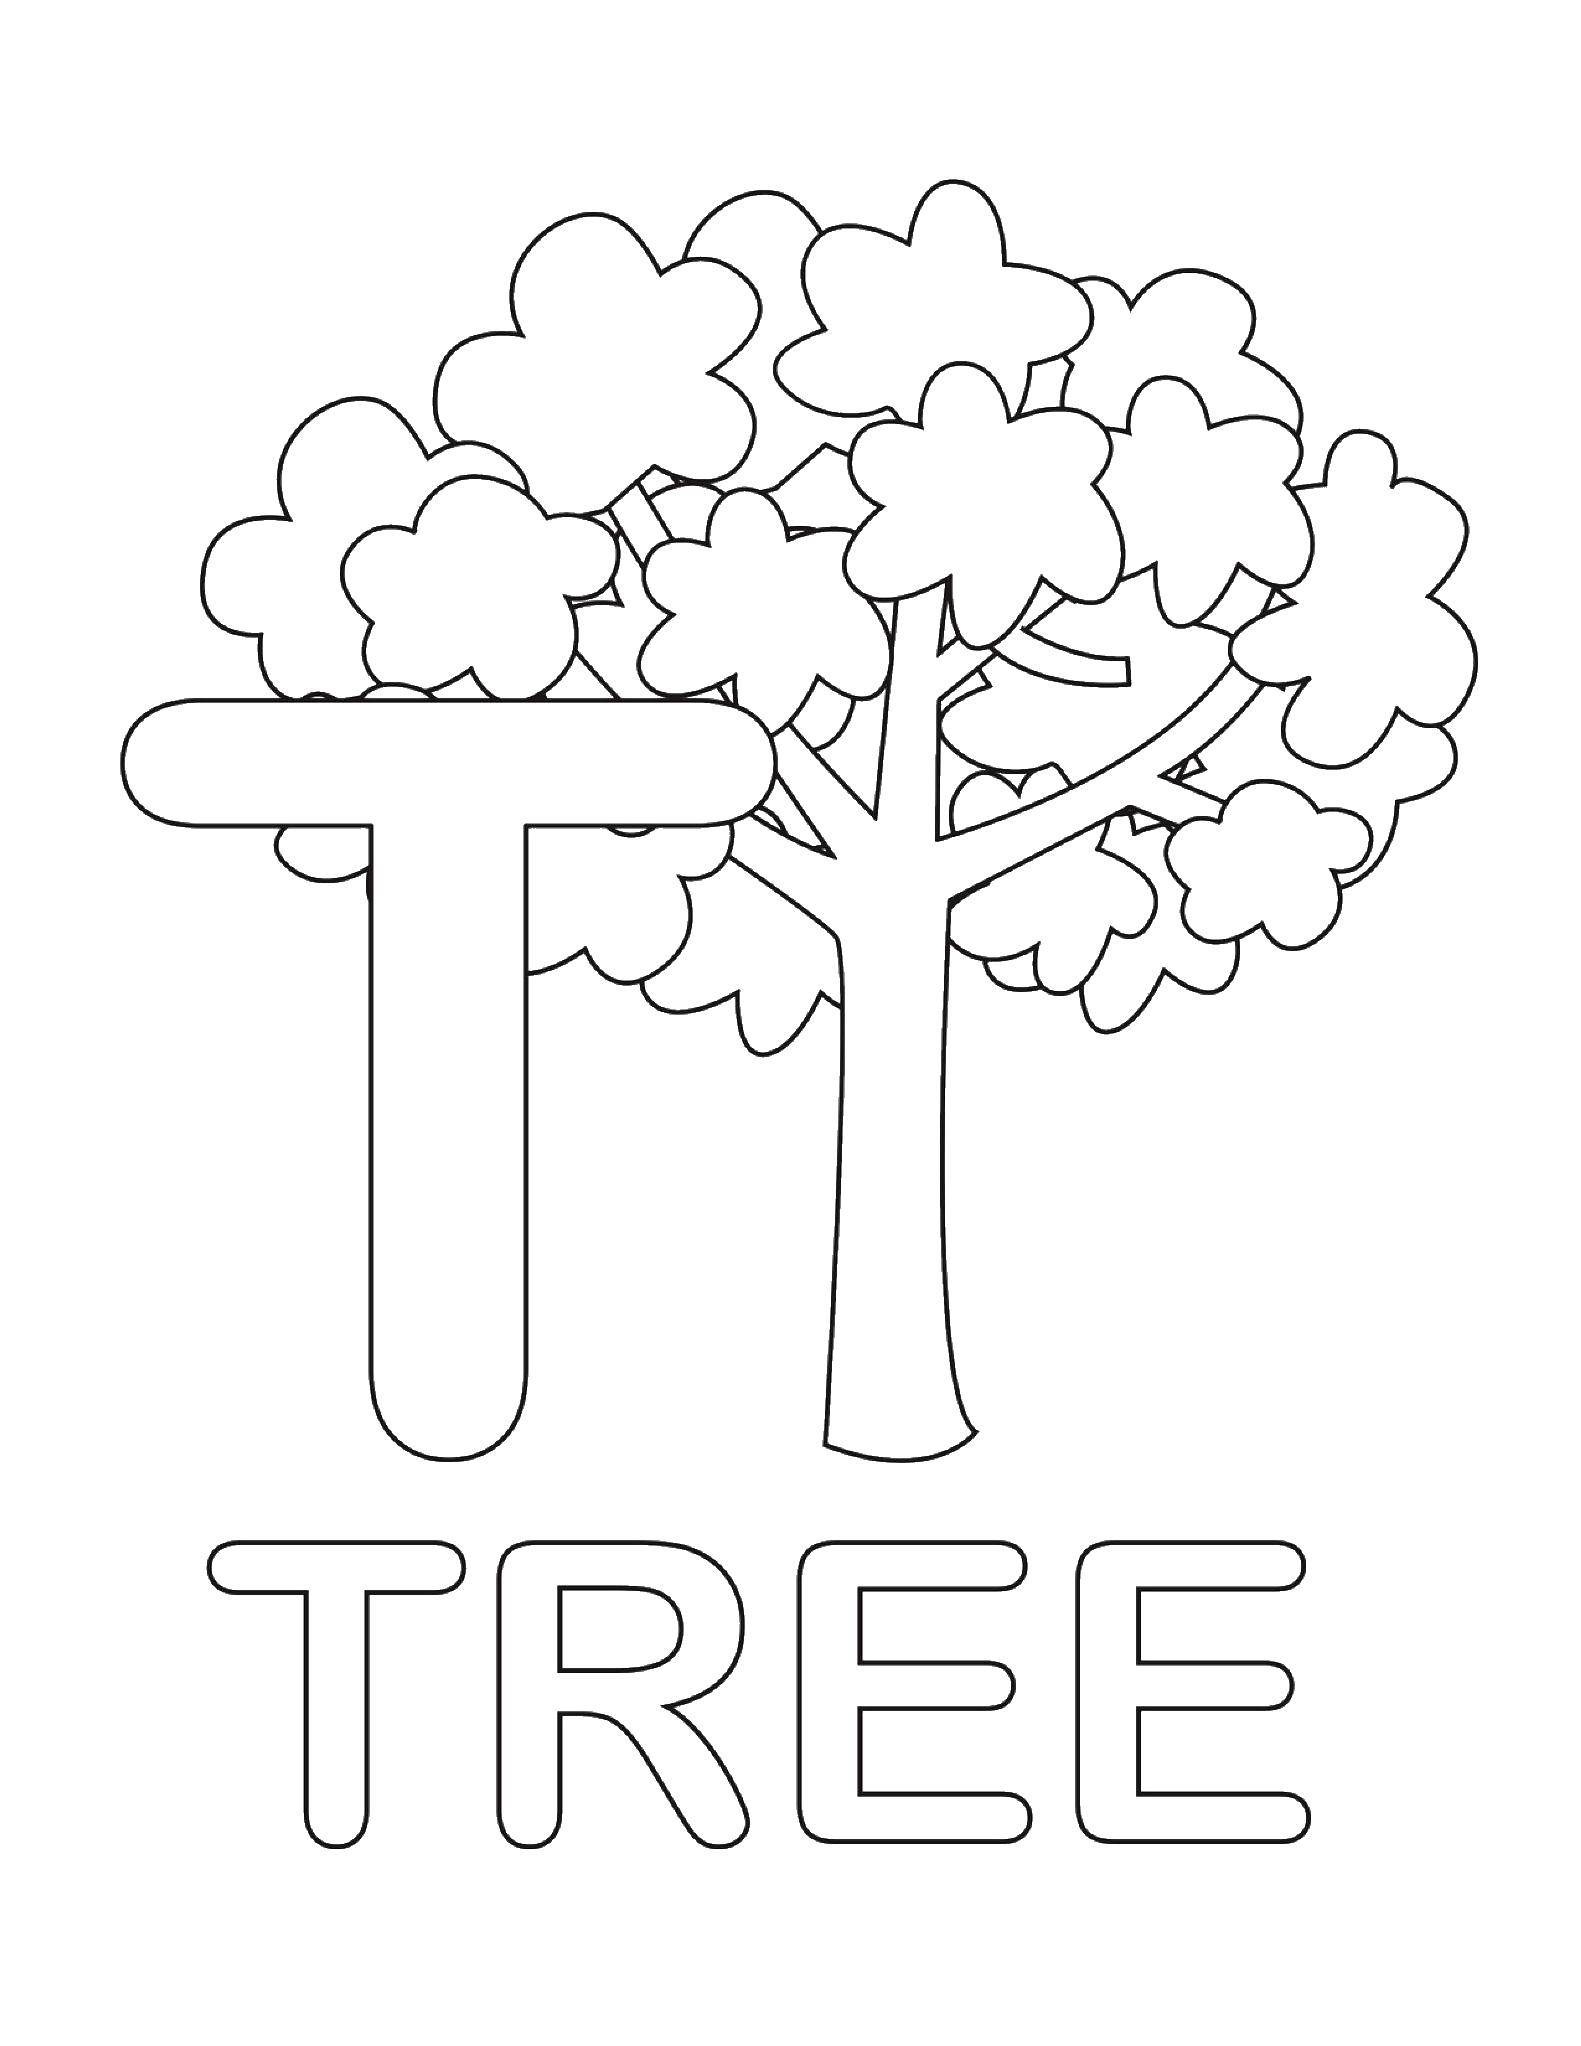 Coloring Tree. Category English words. Tags:  English words, wood.